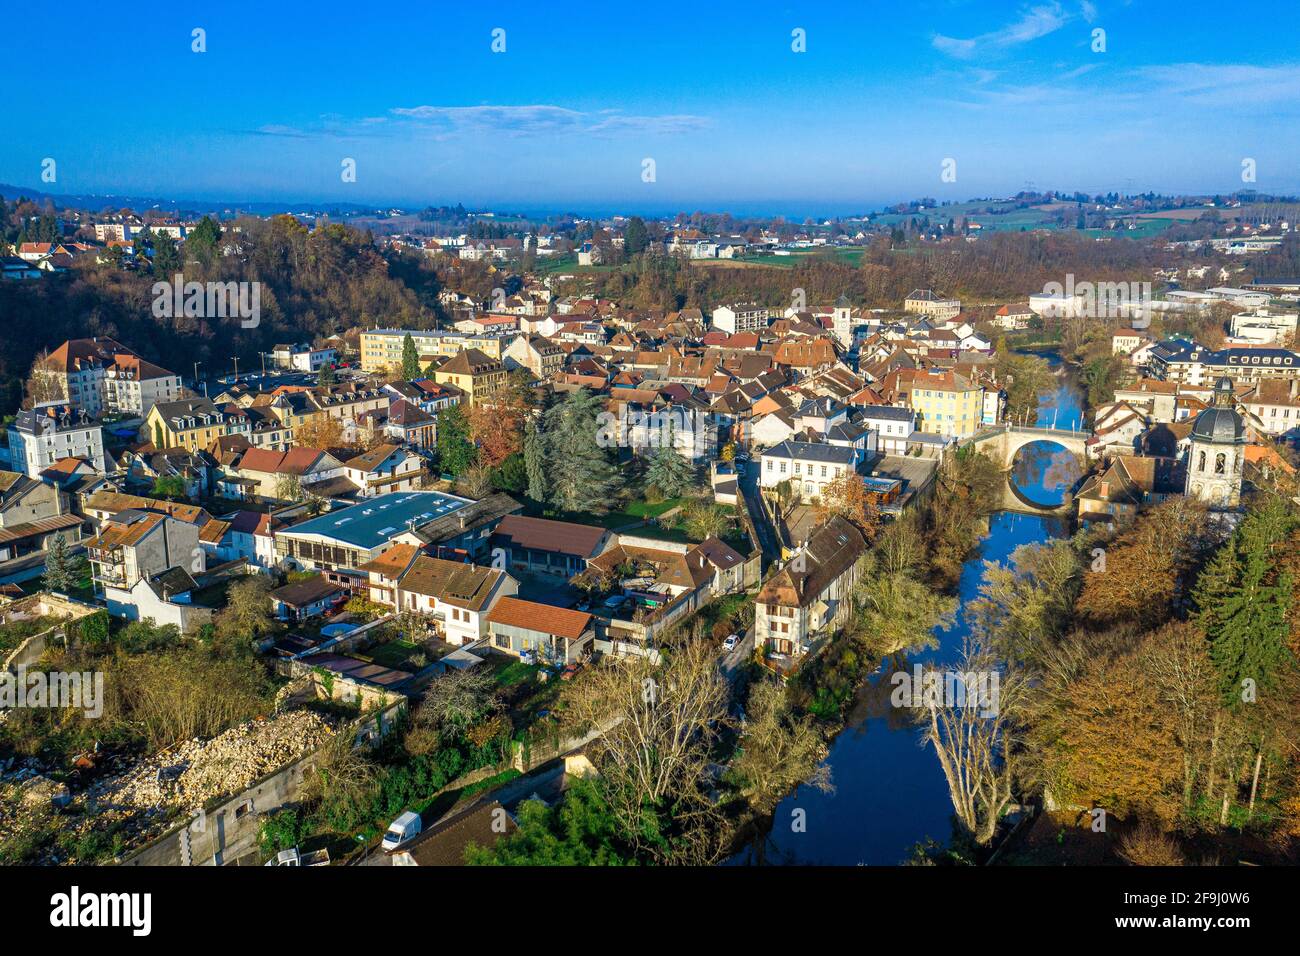 Aerial shot of a small town under the vast blue sky taken using a drone. Stock Photo